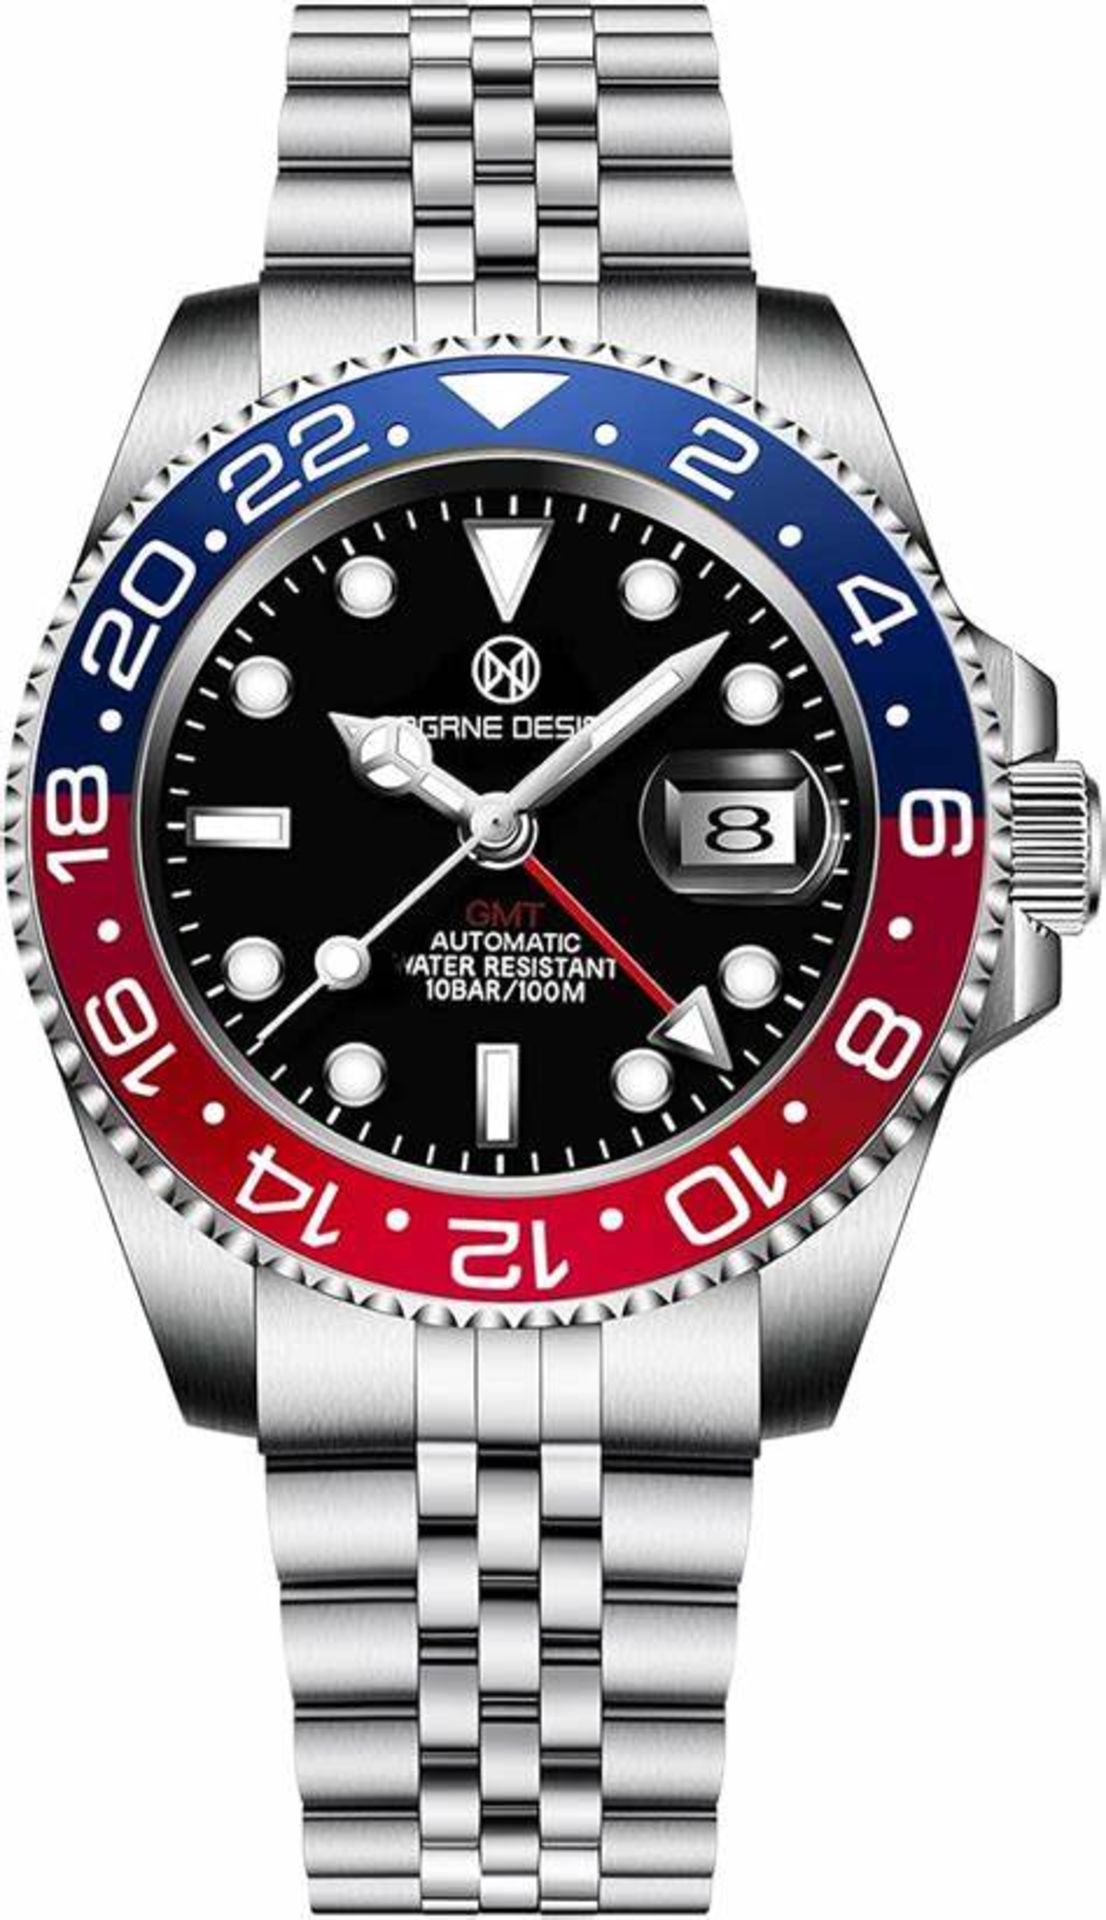 RRP £136.99 PAGRNE DESIGN Men's Watches GMT Automatic Wrist Watch